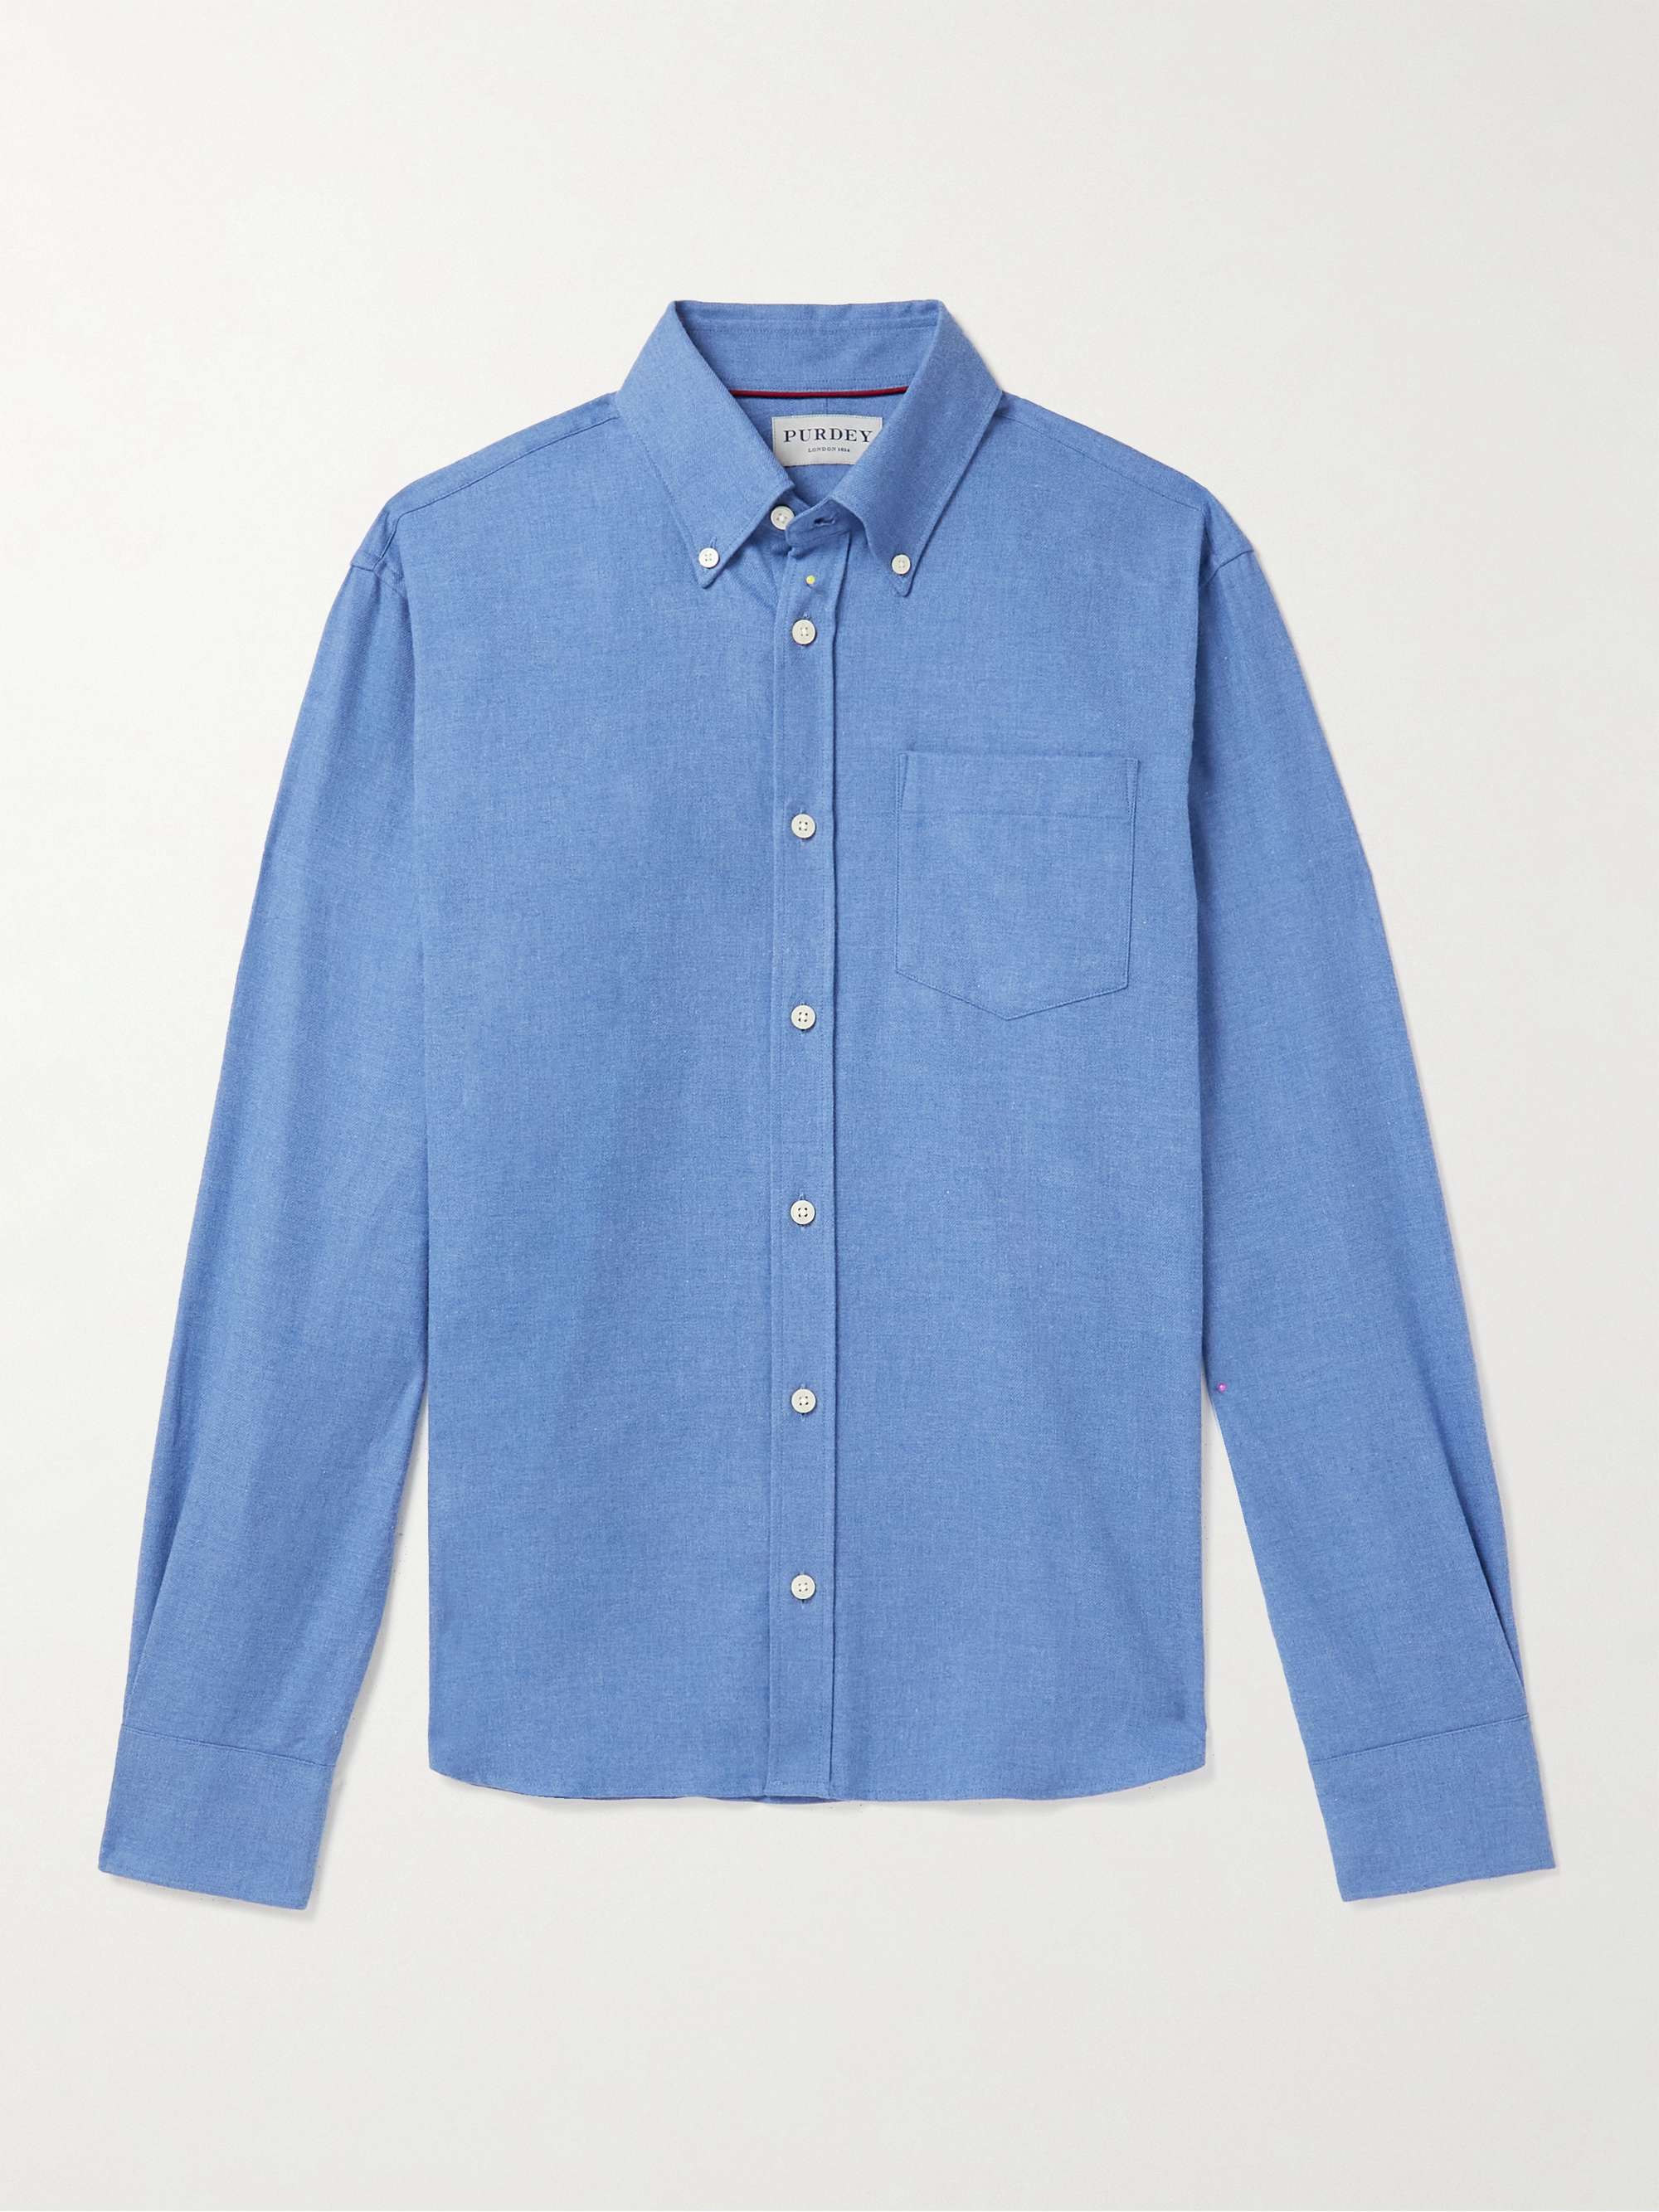 PURDEY Button-Down Collar Garment-Dyed Brushed Cotton-Flannel Shirt